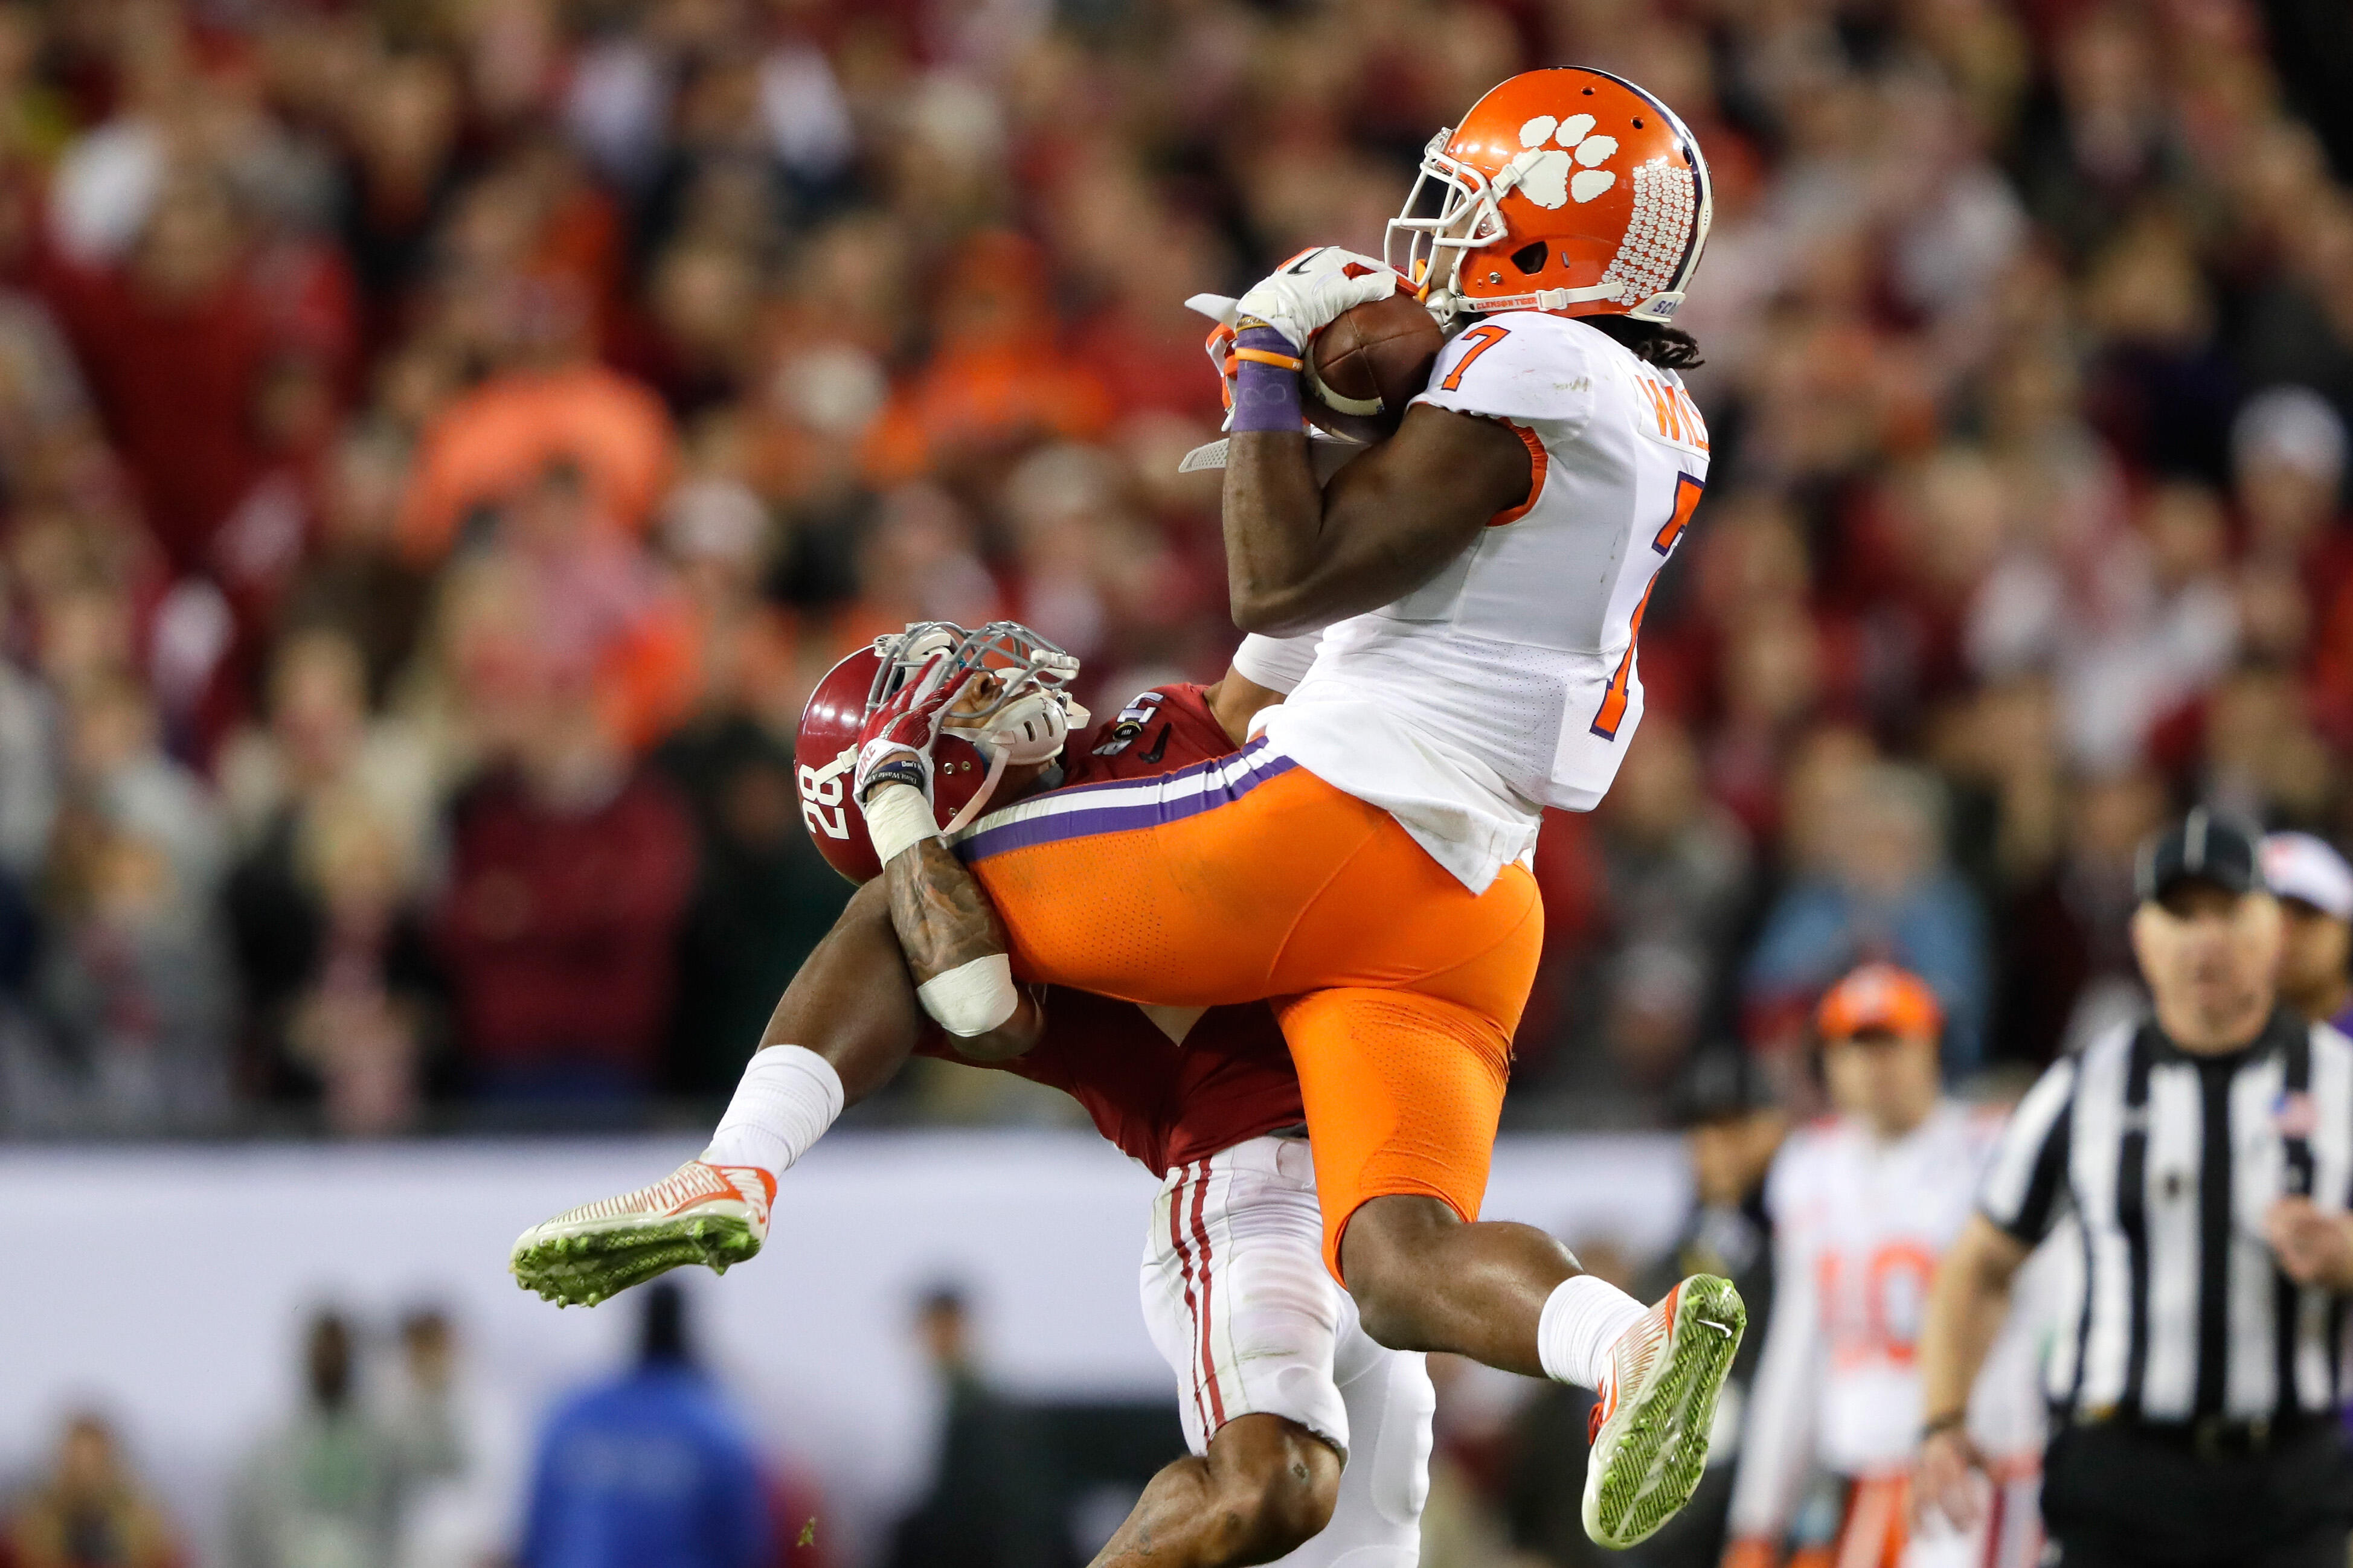 TAMPA, FL - JANUARY 09:  Wide receiver Mike Williams #7 of the Clemson Tigers makes a reception against defensive back Anthony Averett #28 of the Alabama Crimson Tide during the fourth quarter of the 2017 College Football Playoff National Championship Gam